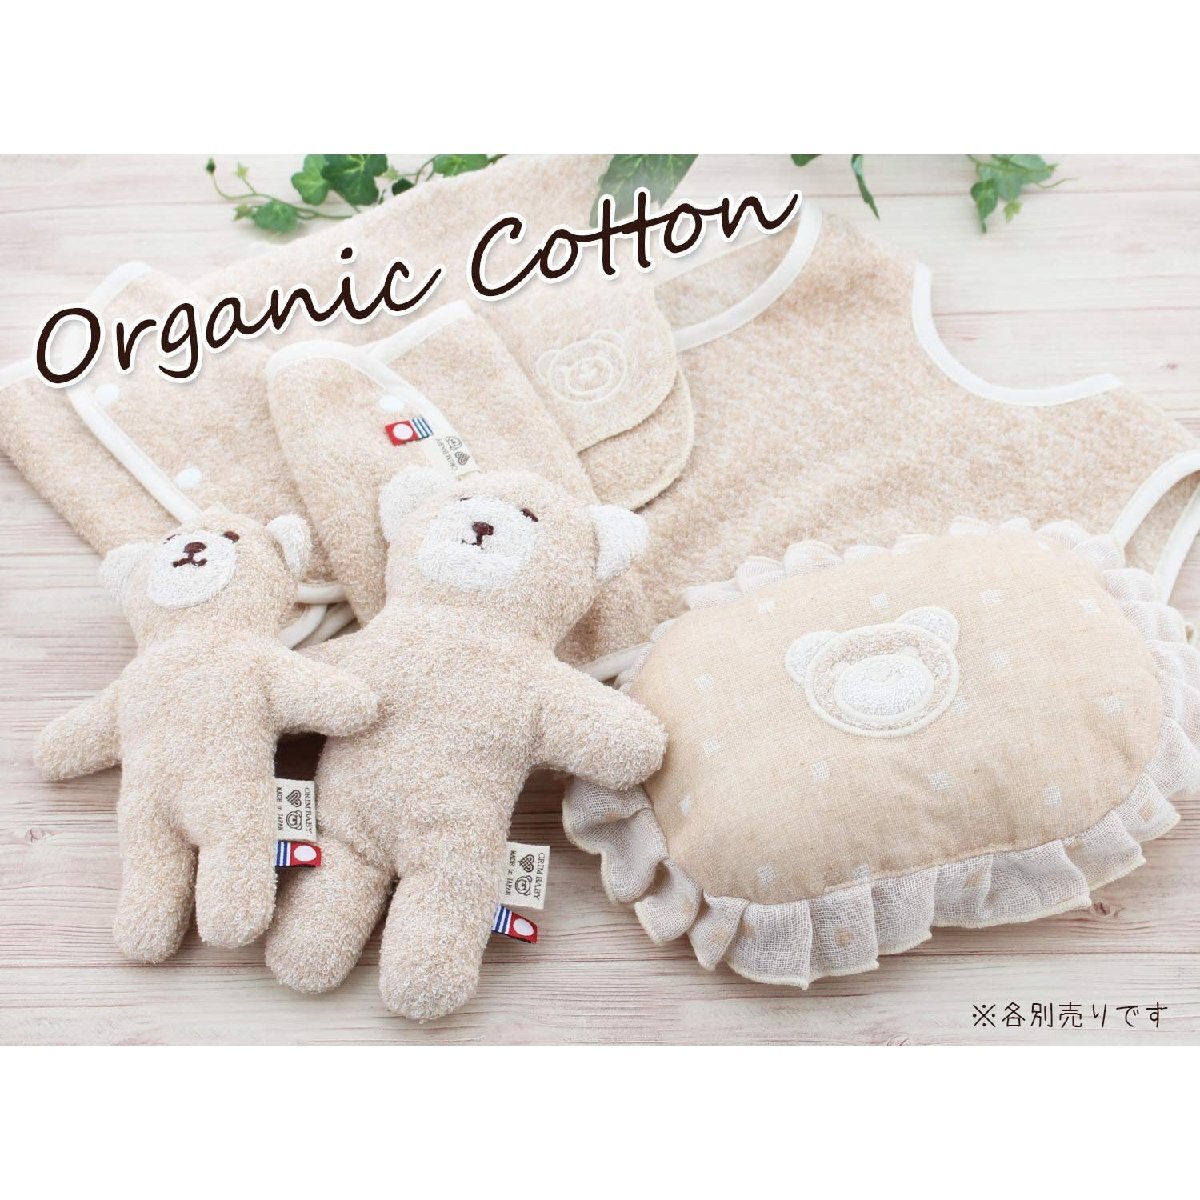  organic cotton 100% now . towel. ......... .. san. soft toy S approximately 16cm baby ............ soft .